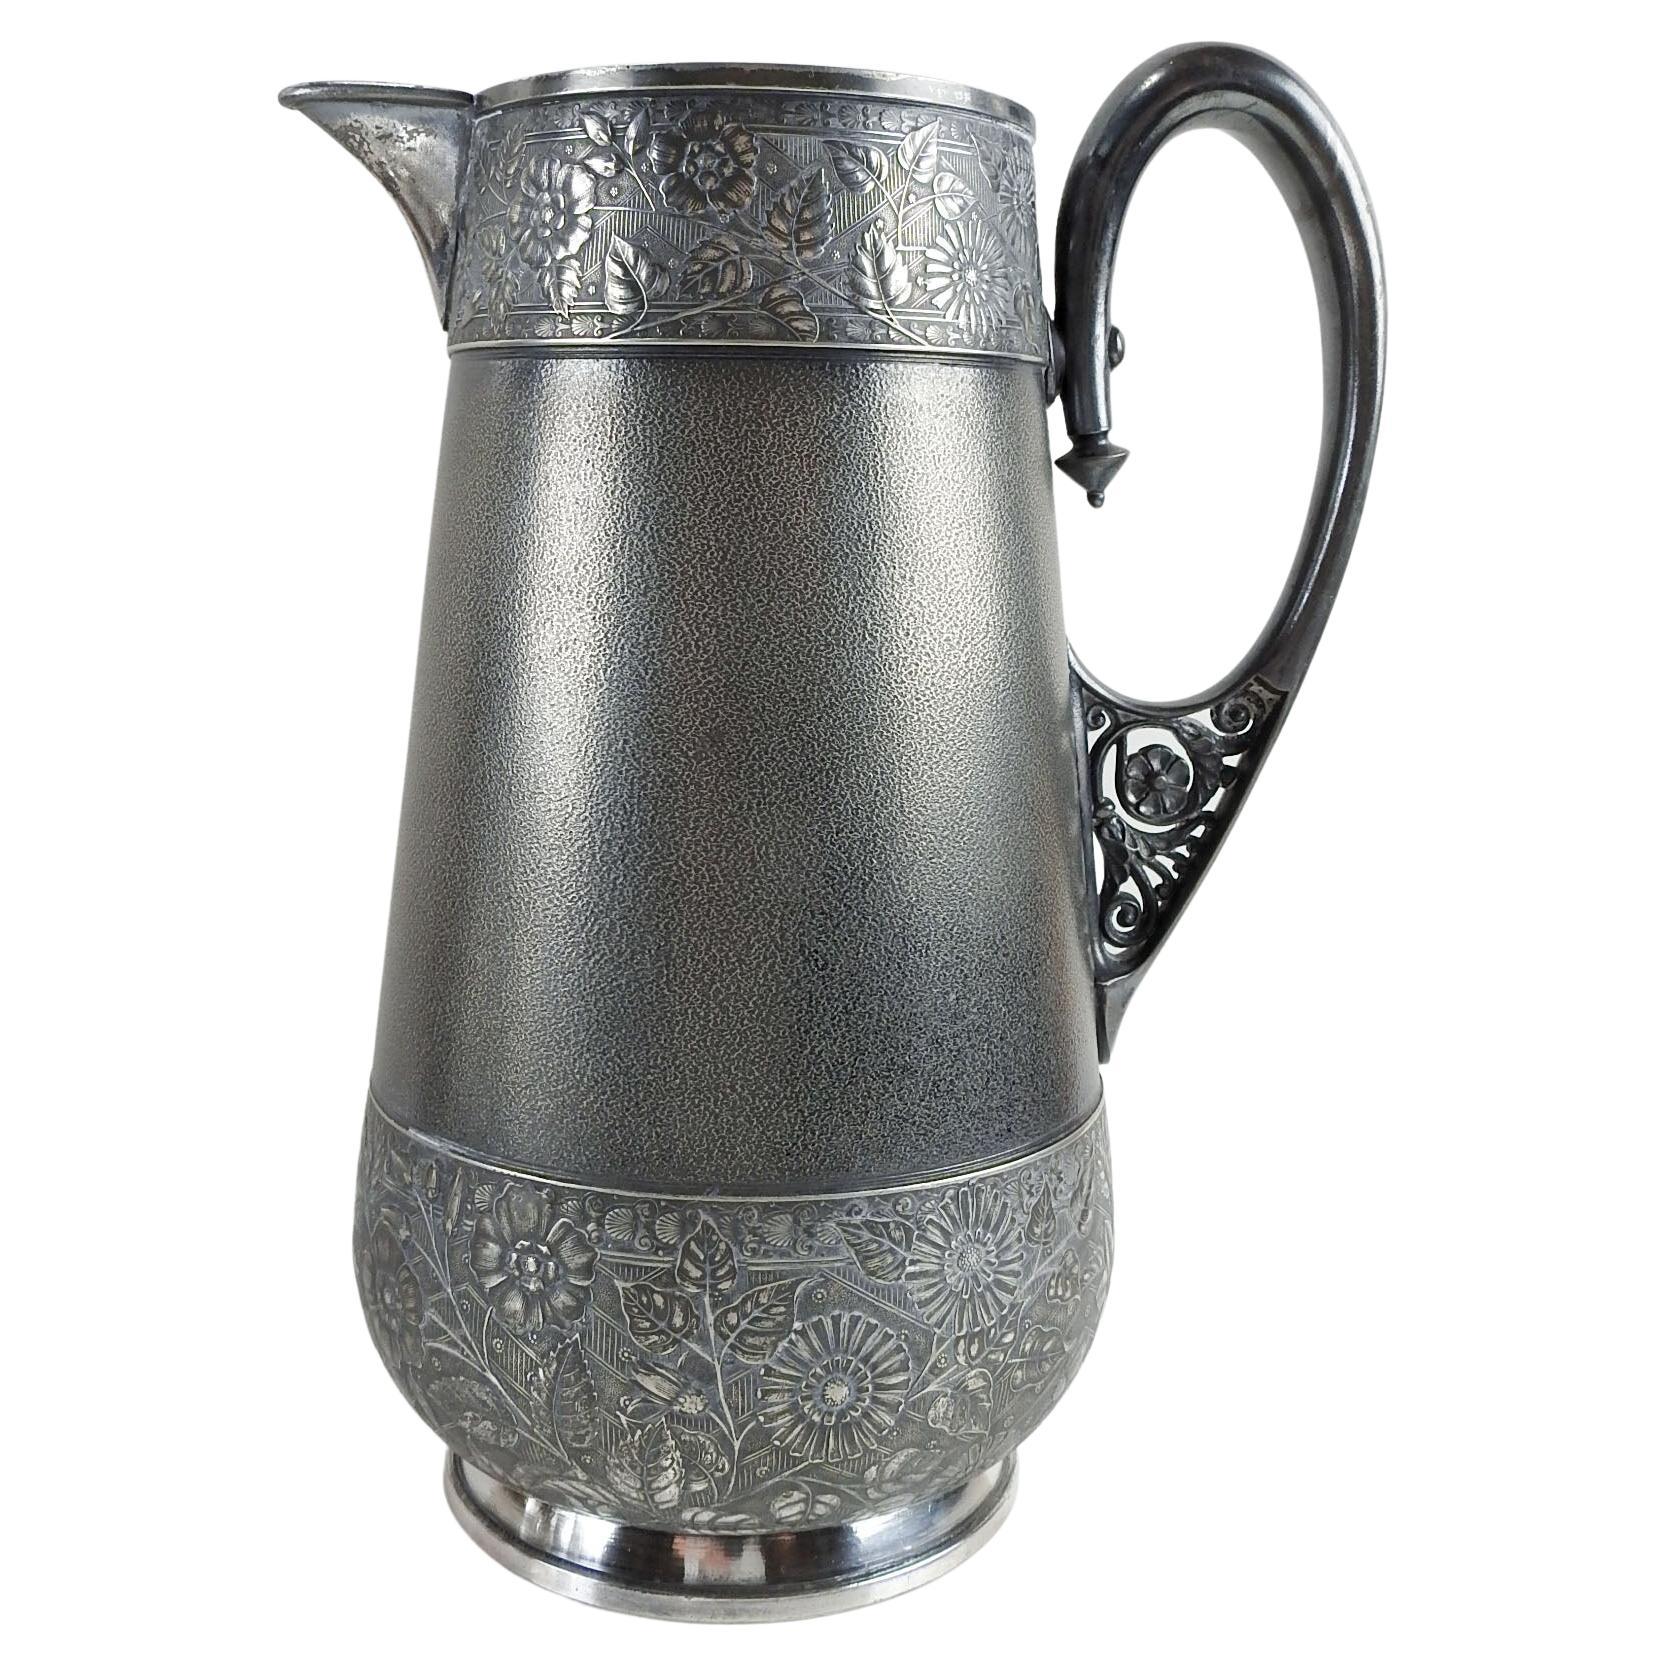 Late 19th Century Aesthetic Movement Silverplate Pitcher